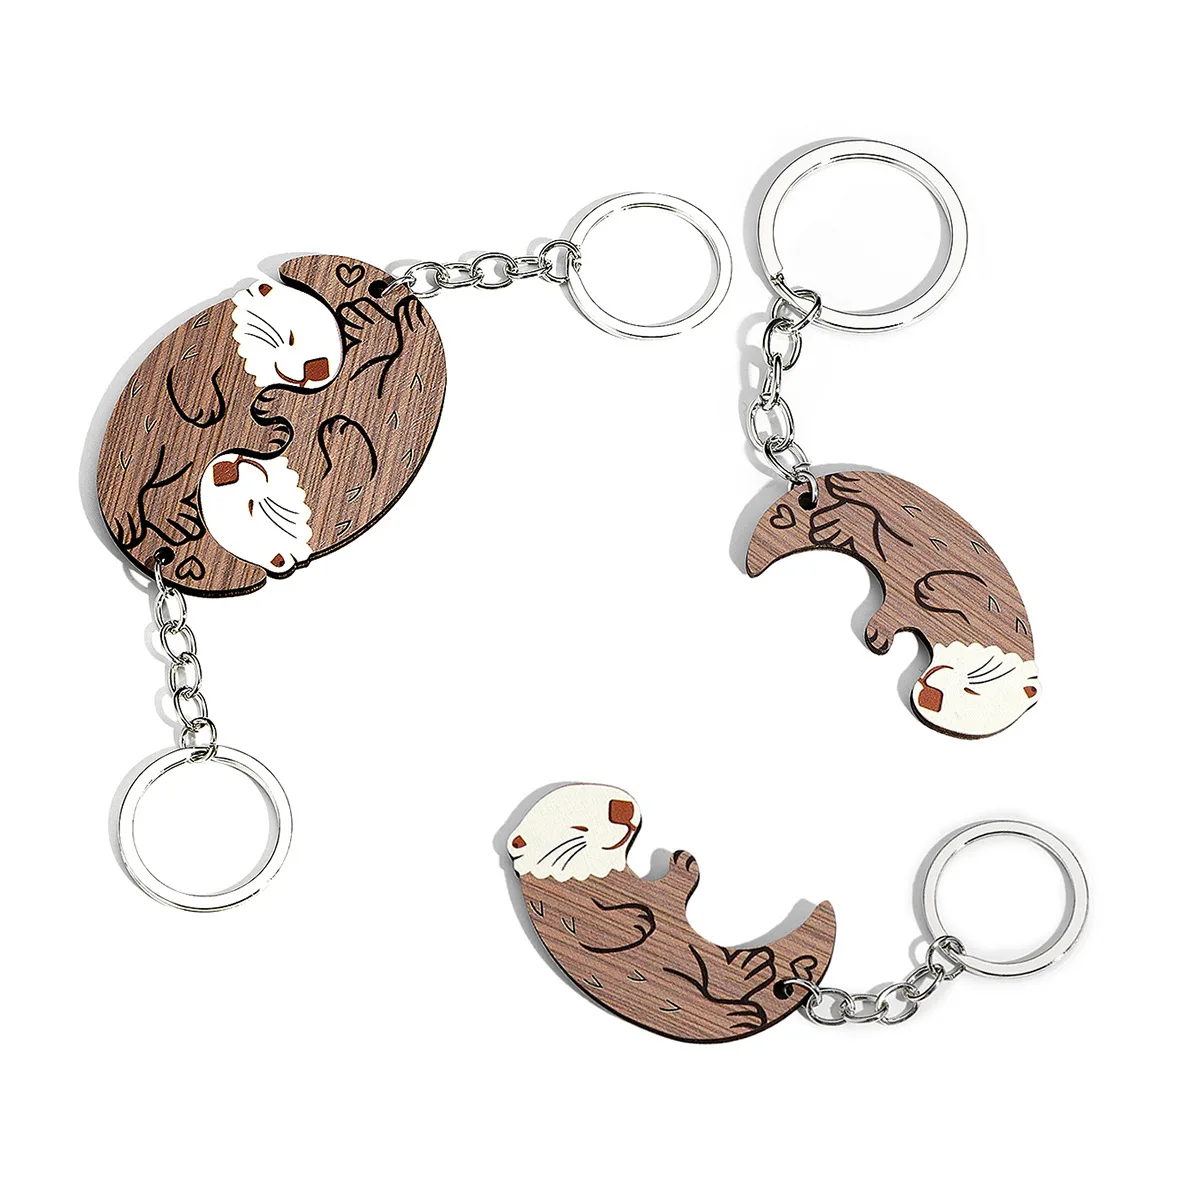 

2Pcs Set Cute Wooden Keychain Otters Shape Couple Pendant Keyring Creativity Animal Matching Puzzles Keychain for Backpack Gift